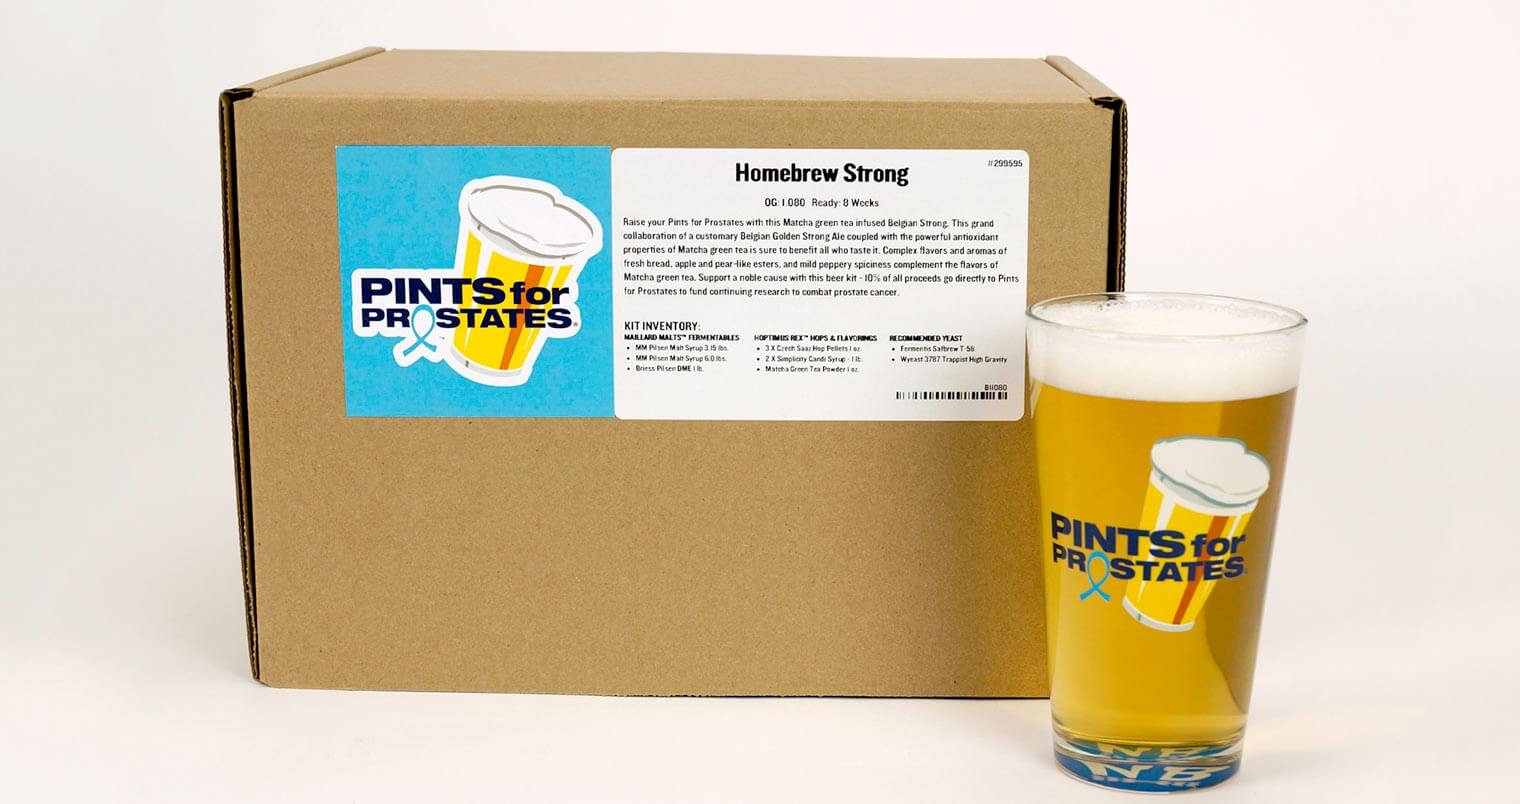 Northern Brewer Partners with Pints for Prostates, beer news, featured image